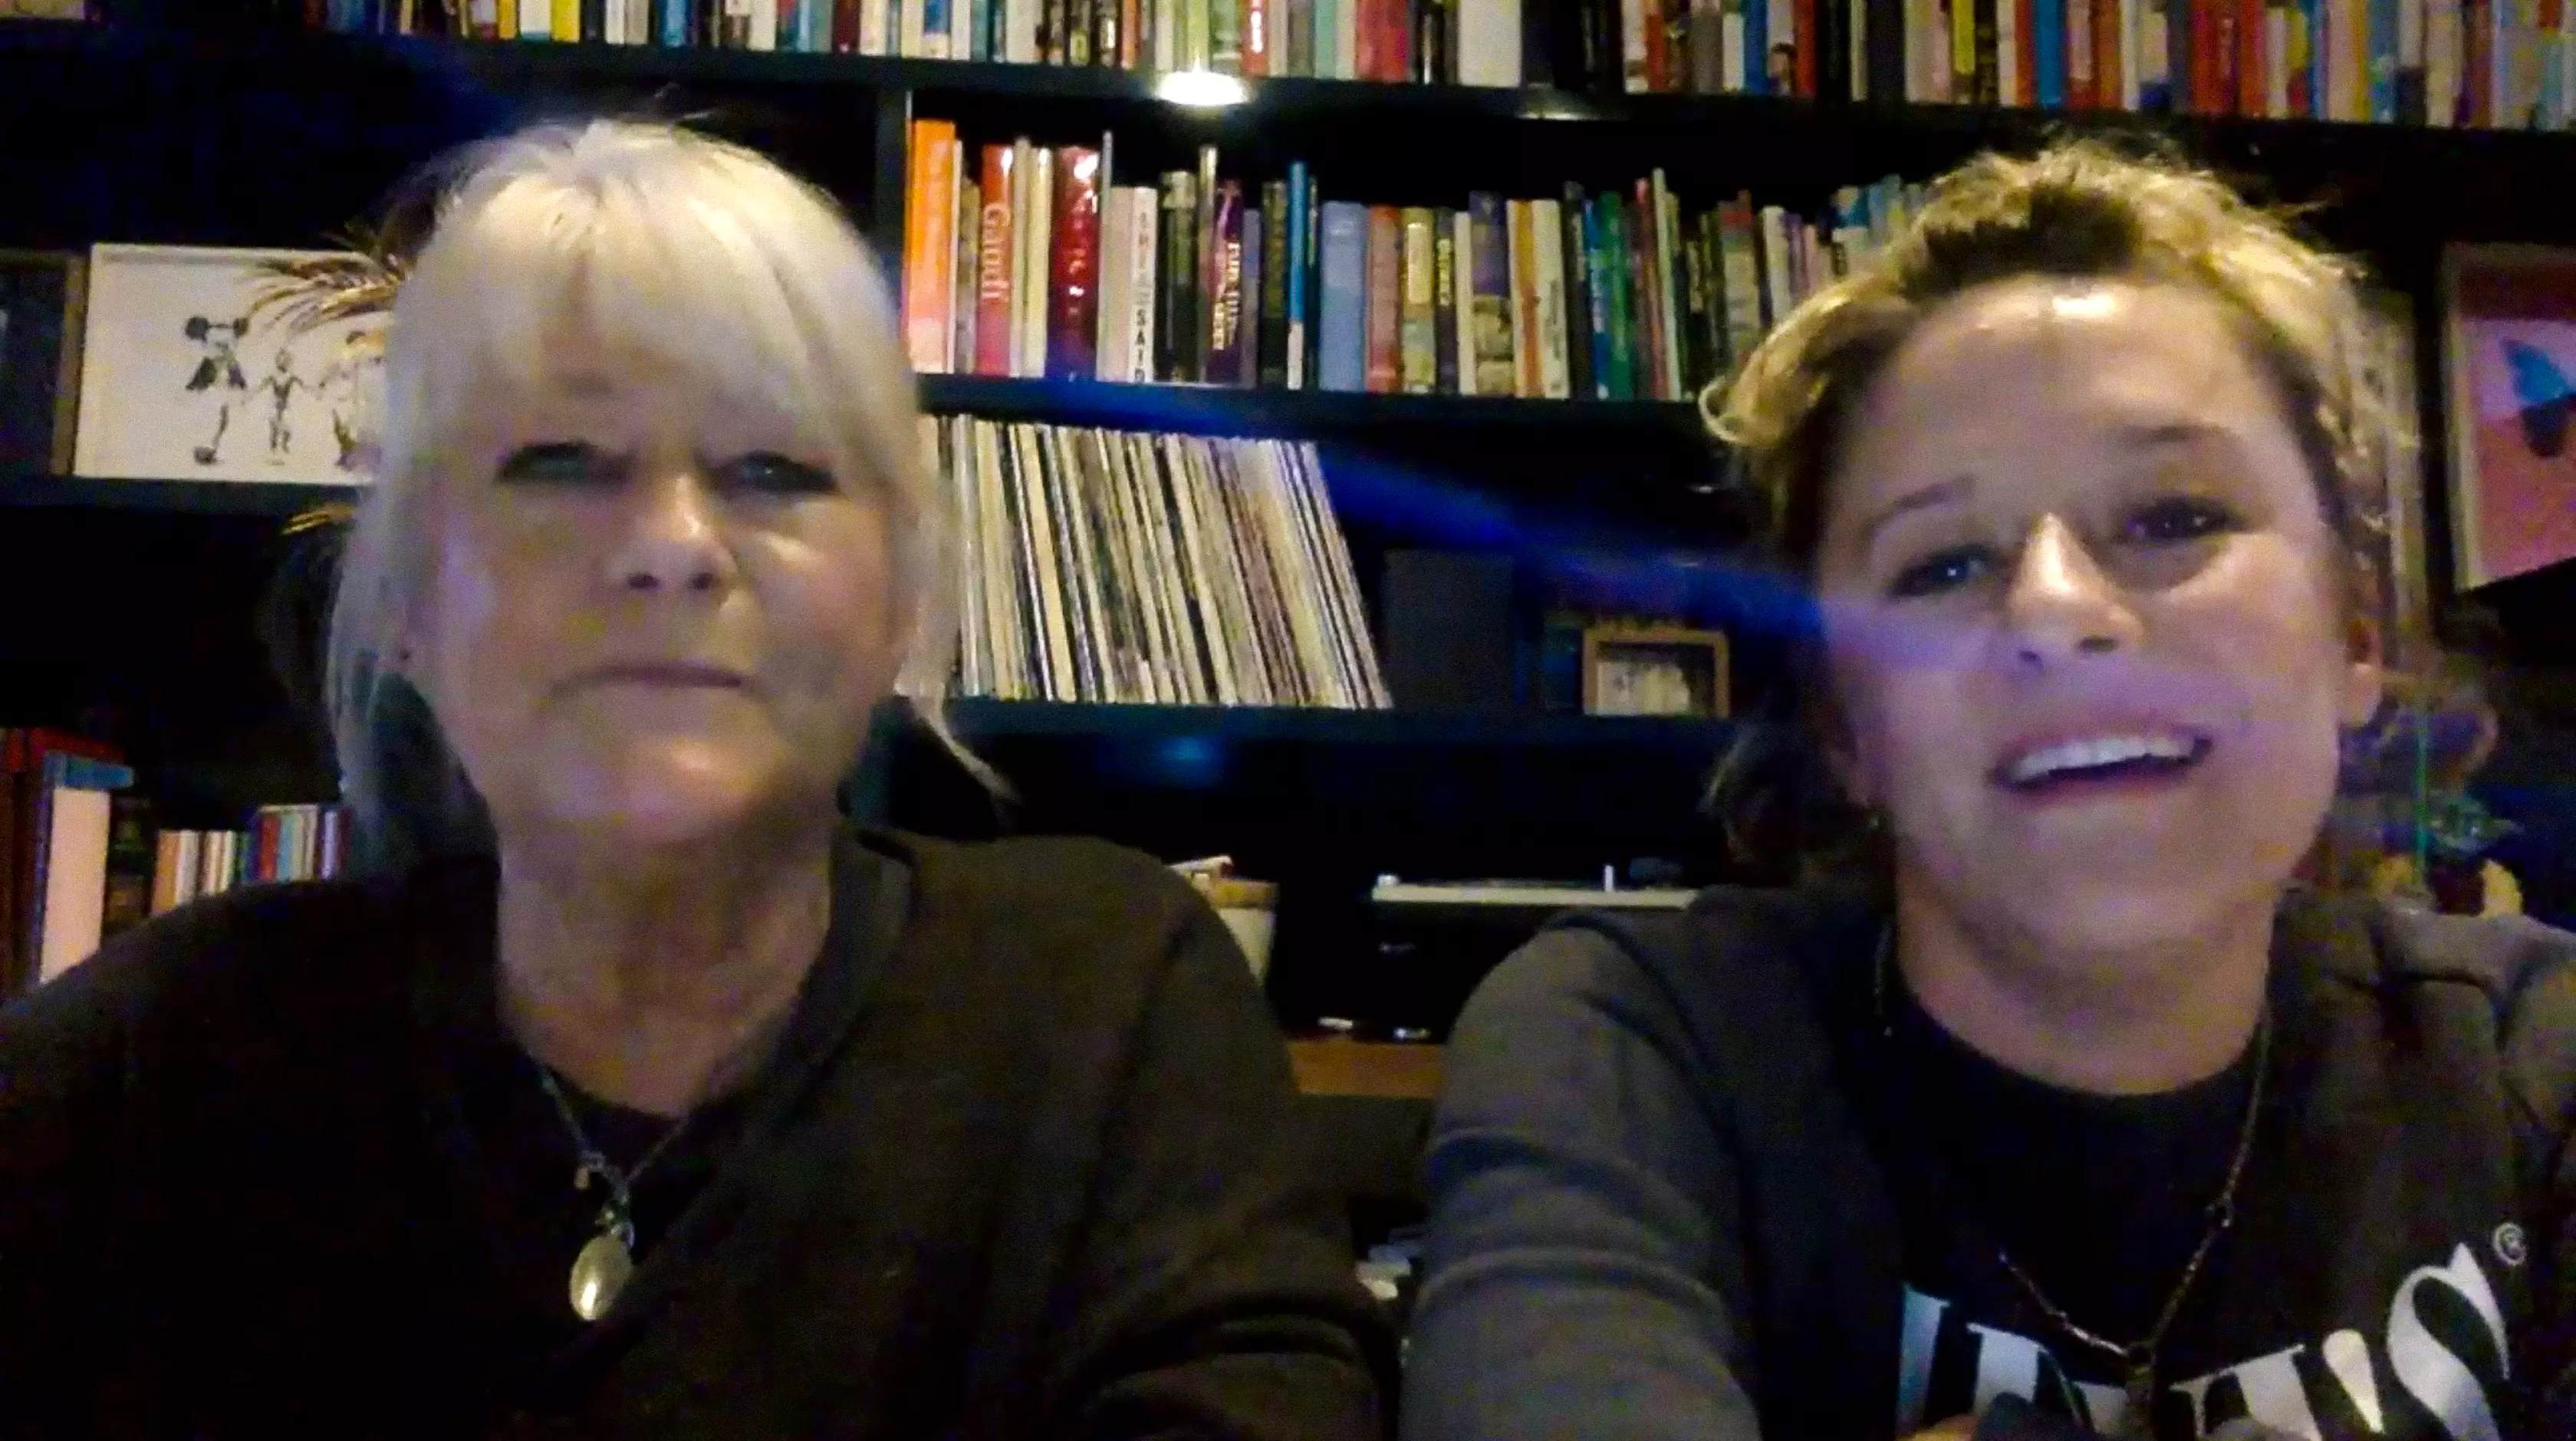 Christine and Jody spoke about the making of the documentary (